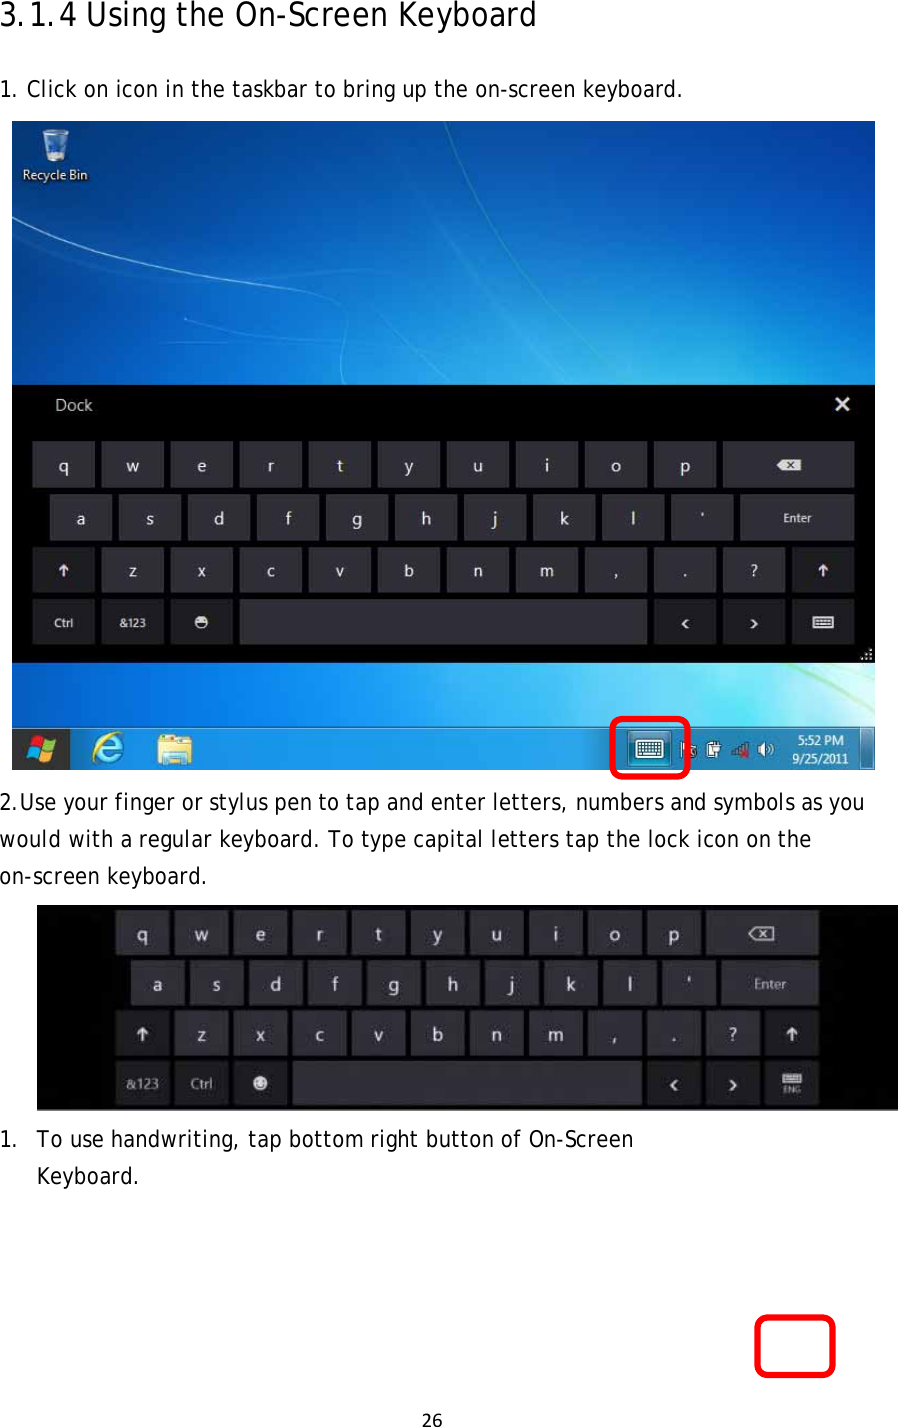 263.1.4 Using the On-Screen Keyboard 1. Click on icon in the taskbar to bring up the on-screen keyboard.  2.Use your finger or stylus pen to tap and enter letters, numbers and symbols as you would with a regular keyboard. To type capital letters tap the lock icon on the on-screen keyboard.  1. To use handwriting, tap bottom right button of On-Screen Keyboard.